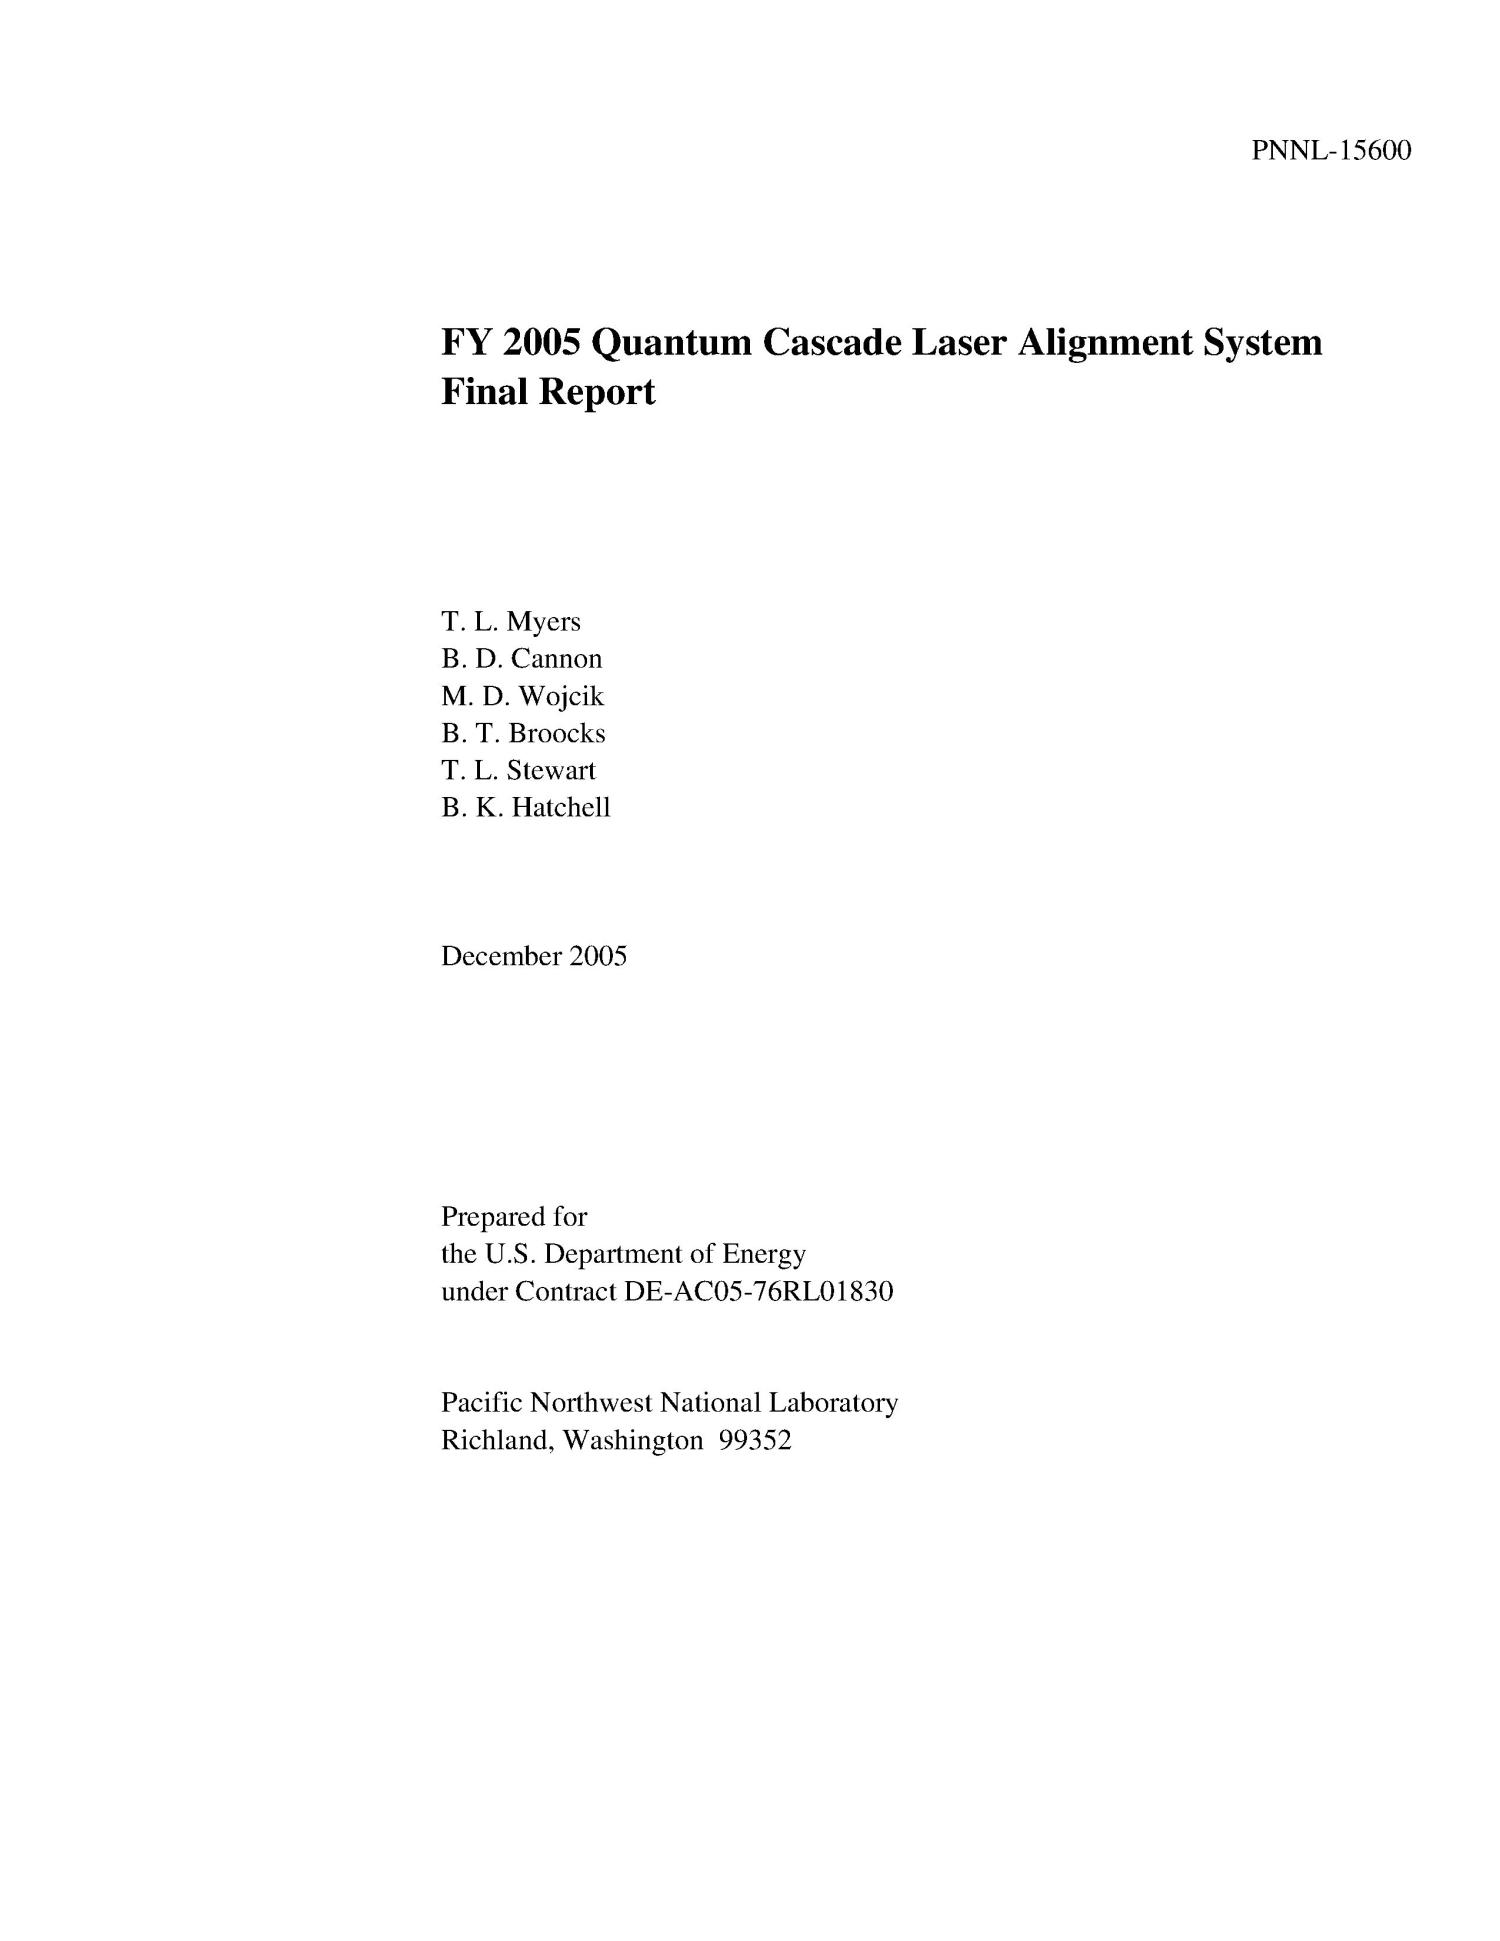 FY 2005 Quantum Cascade Laser Alignment System Final Report
                                                
                                                    [Sequence #]: 3 of 52
                                                